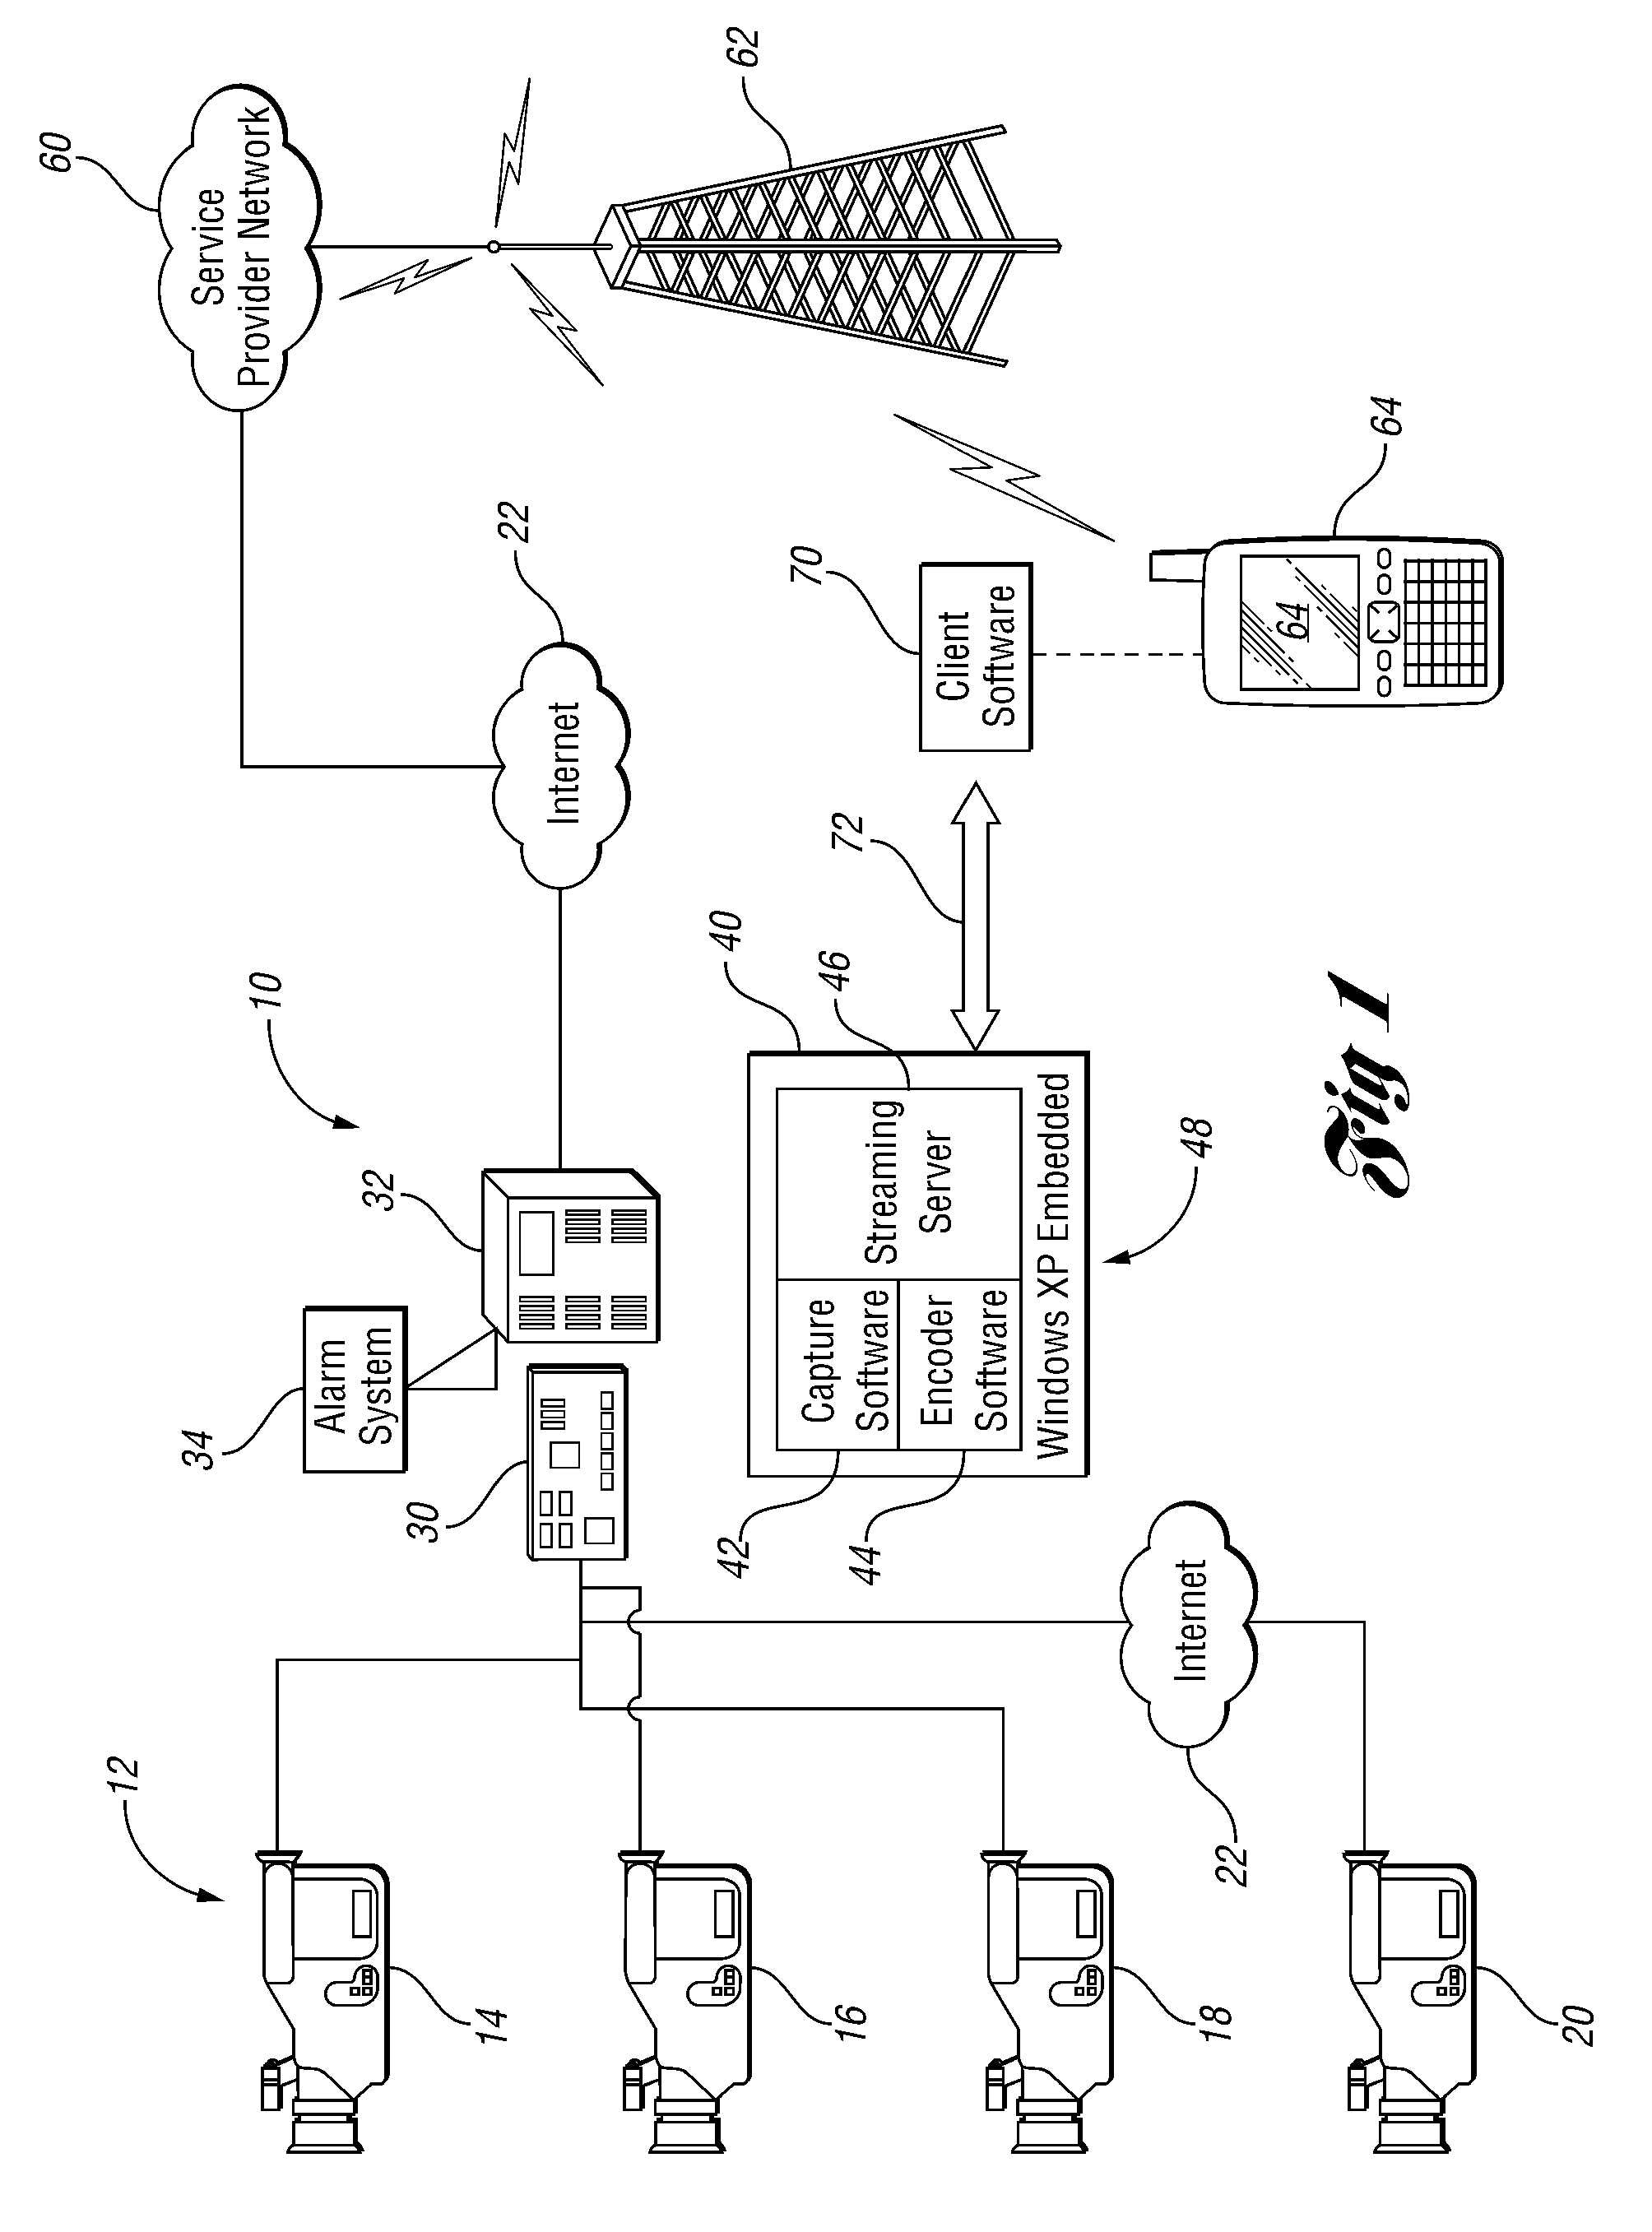 System and Method for Video Distribution Management with Mobile Services